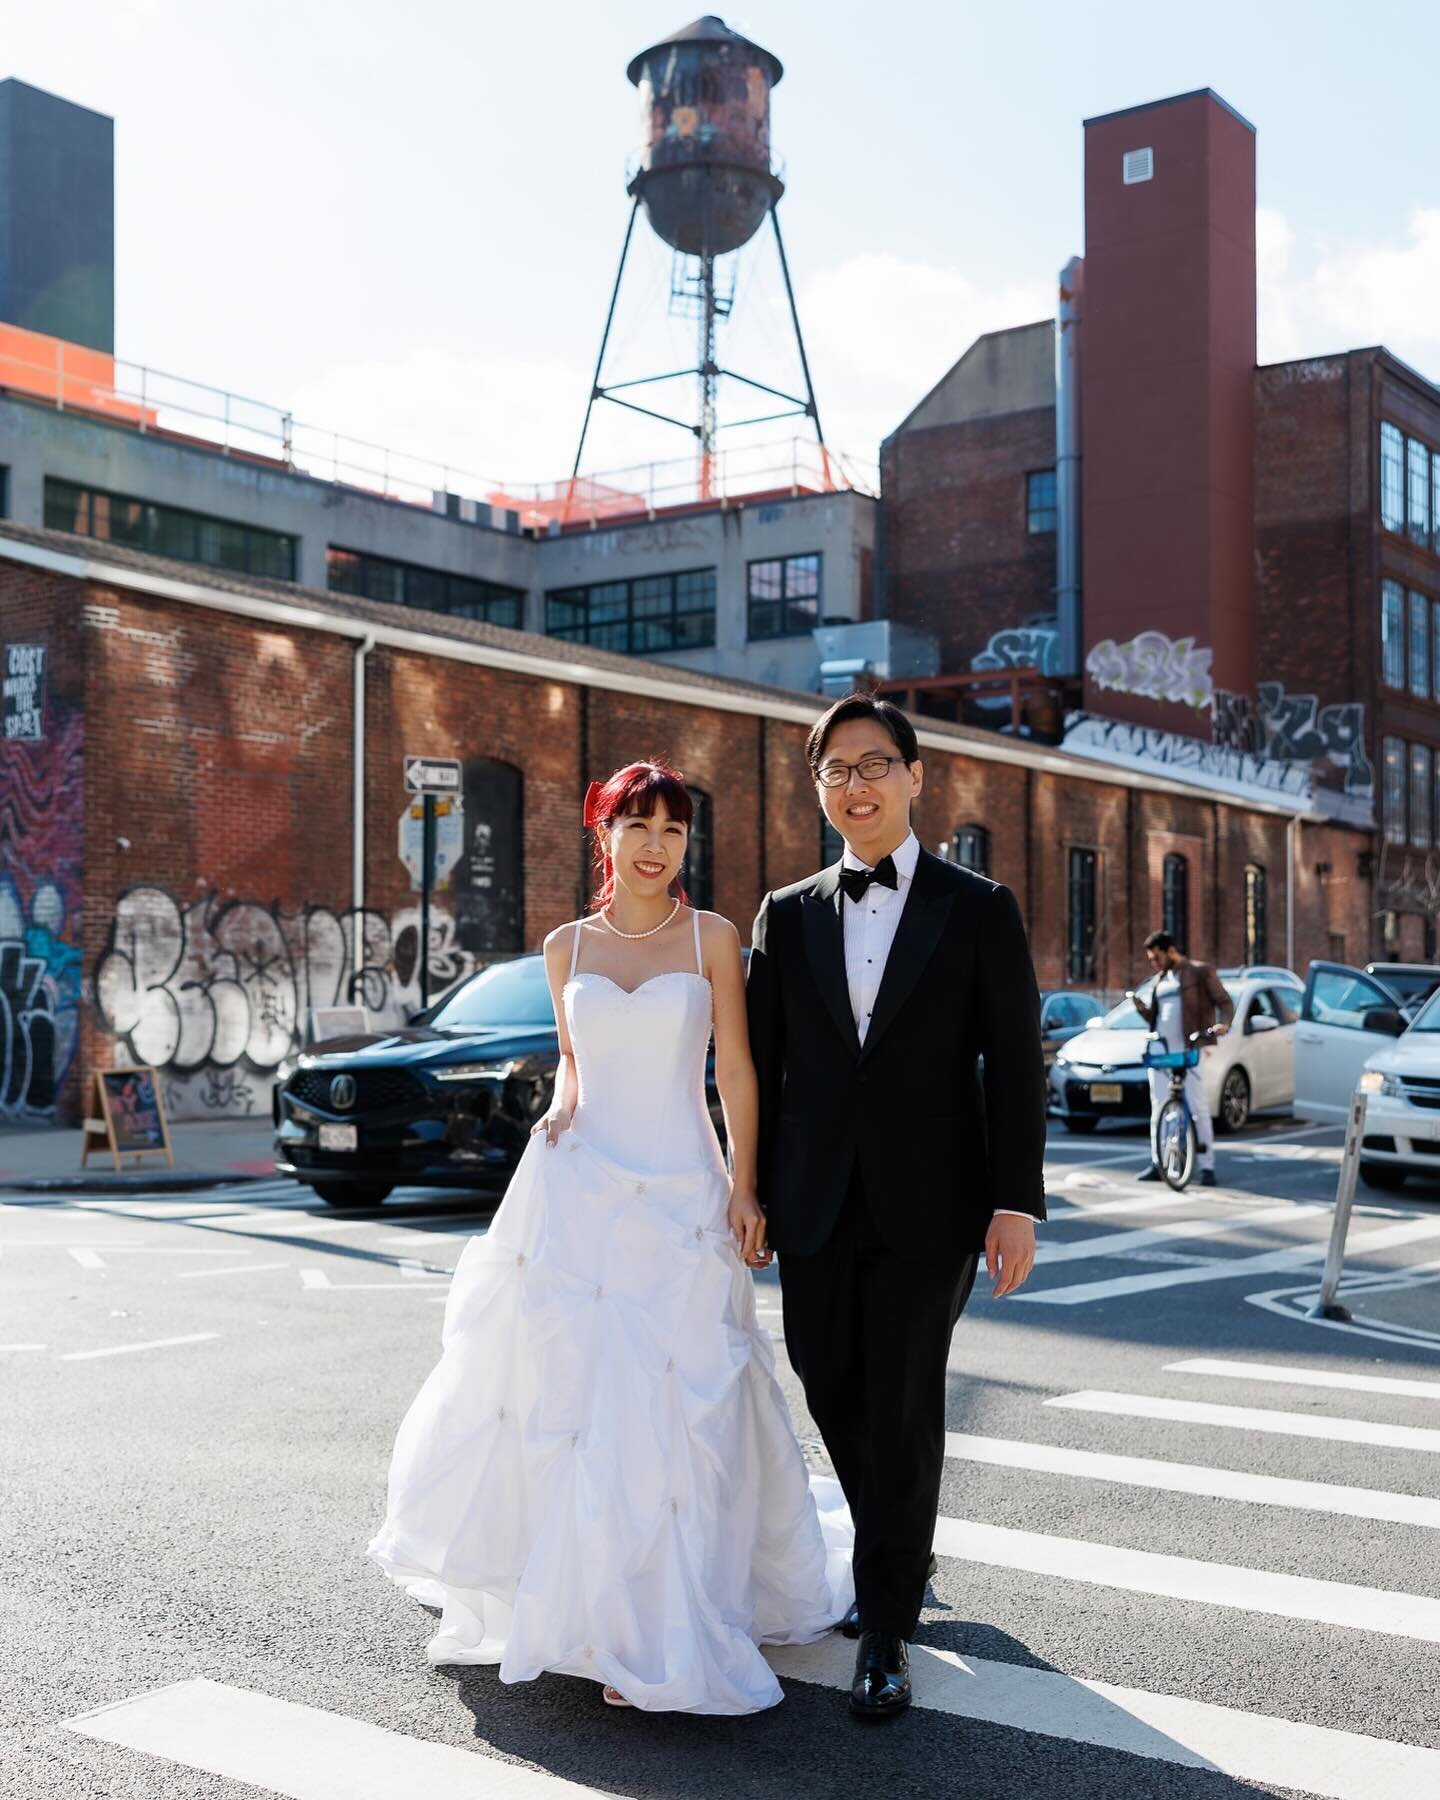 Emily and Sam brought their love of food, shoes, and family tradition all together into an amazing wedding at @dobbinstnyc. Emily wore 3 different dresses throughout the night and 2 of them were from her mother&rsquo;s wedding. She also works for a s